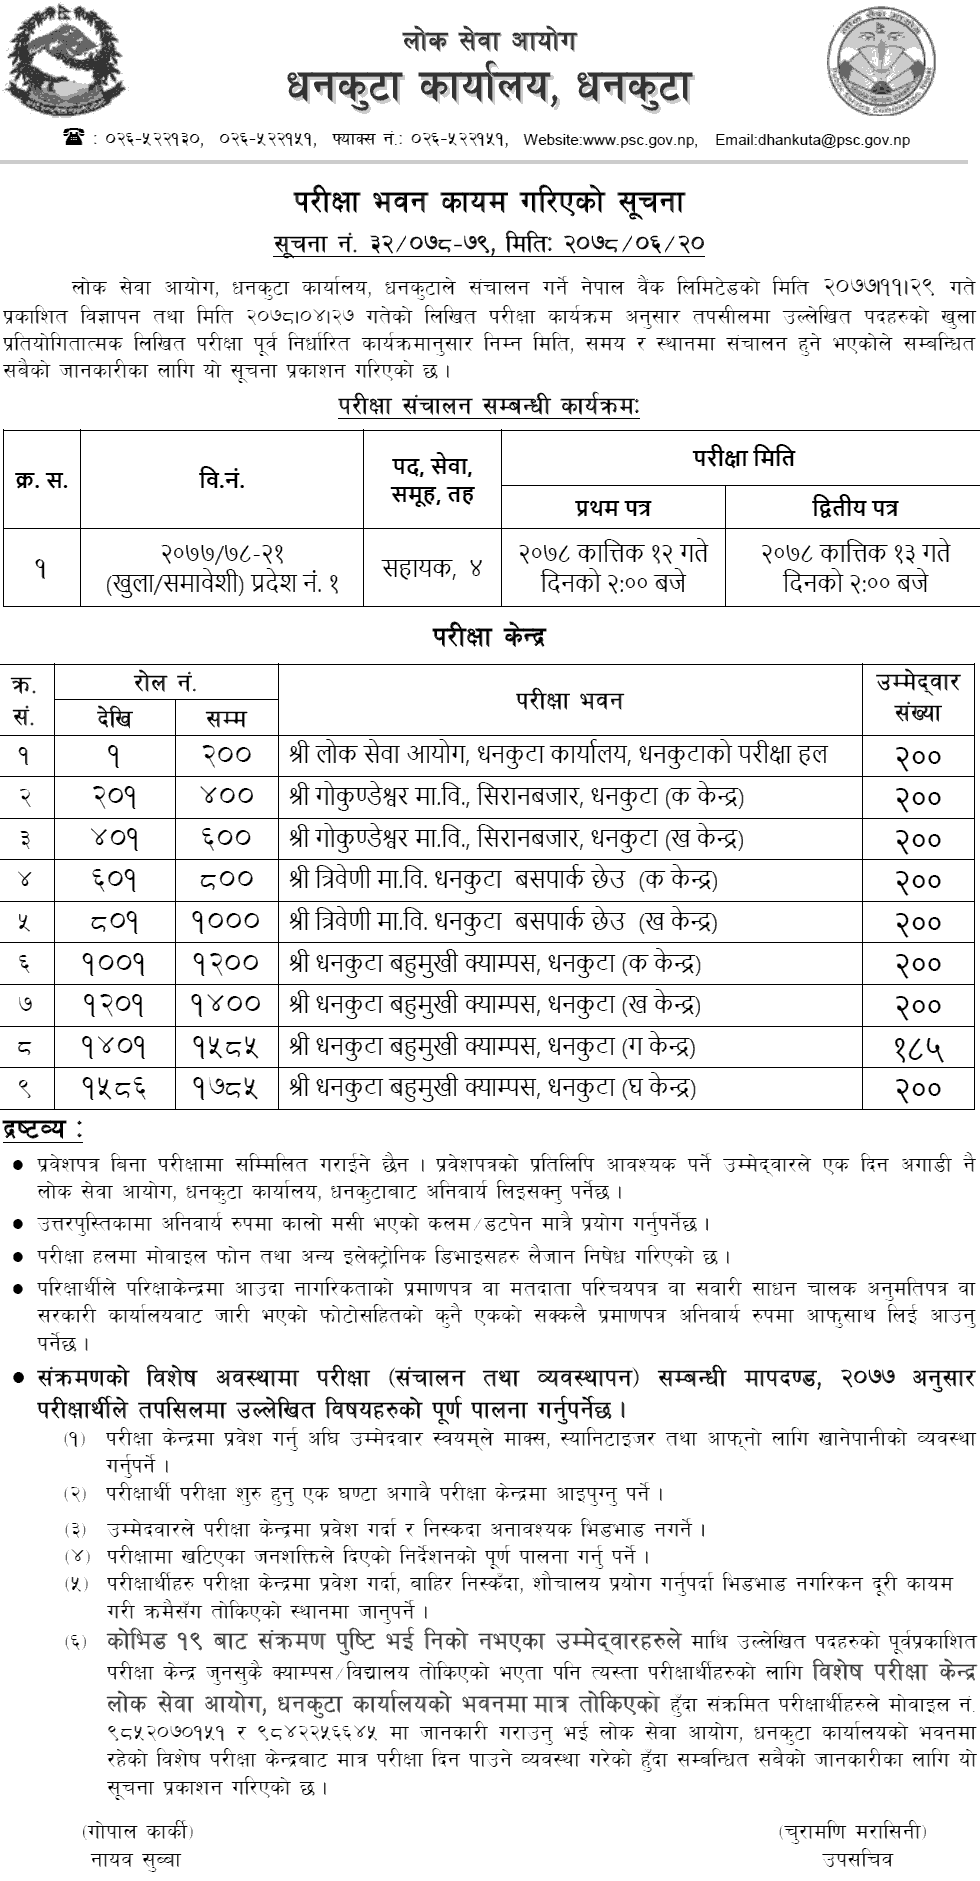 Nepal Bank Limited 4th Level Assistant Written Exam Center Dhankuta